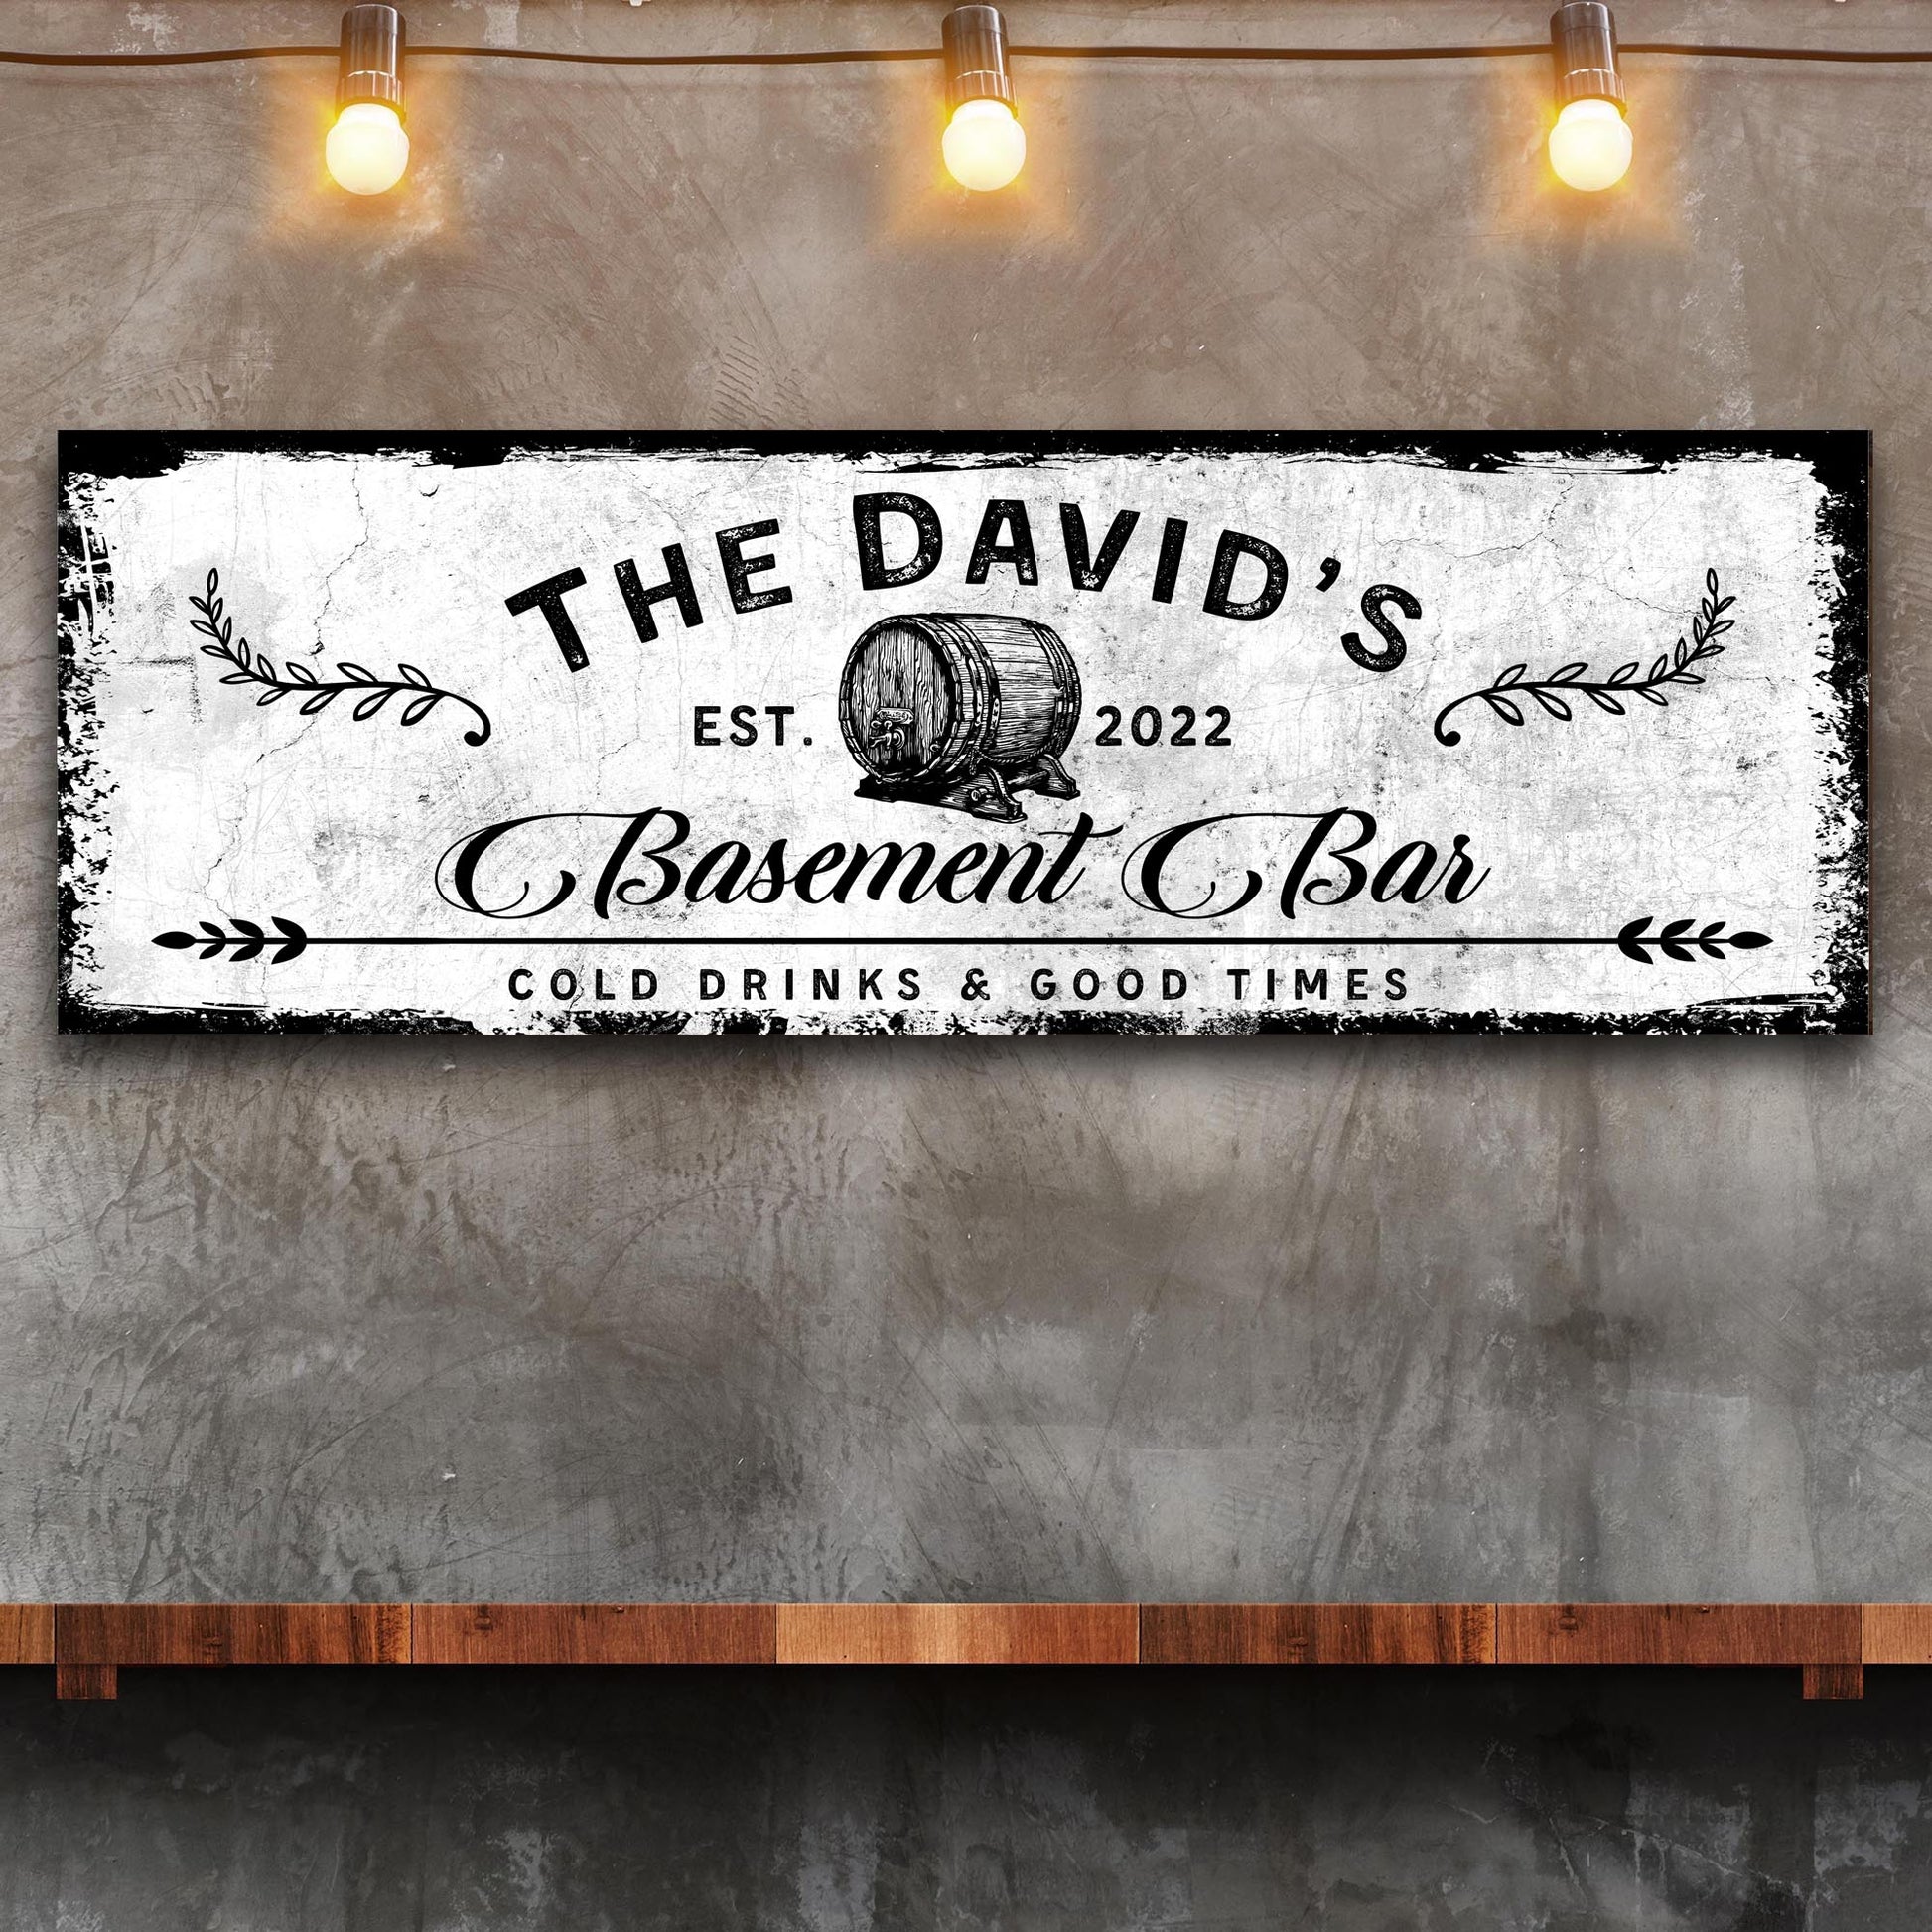 Basement Bar Barrel Sign Style 2 - Image by Tailored Canvases